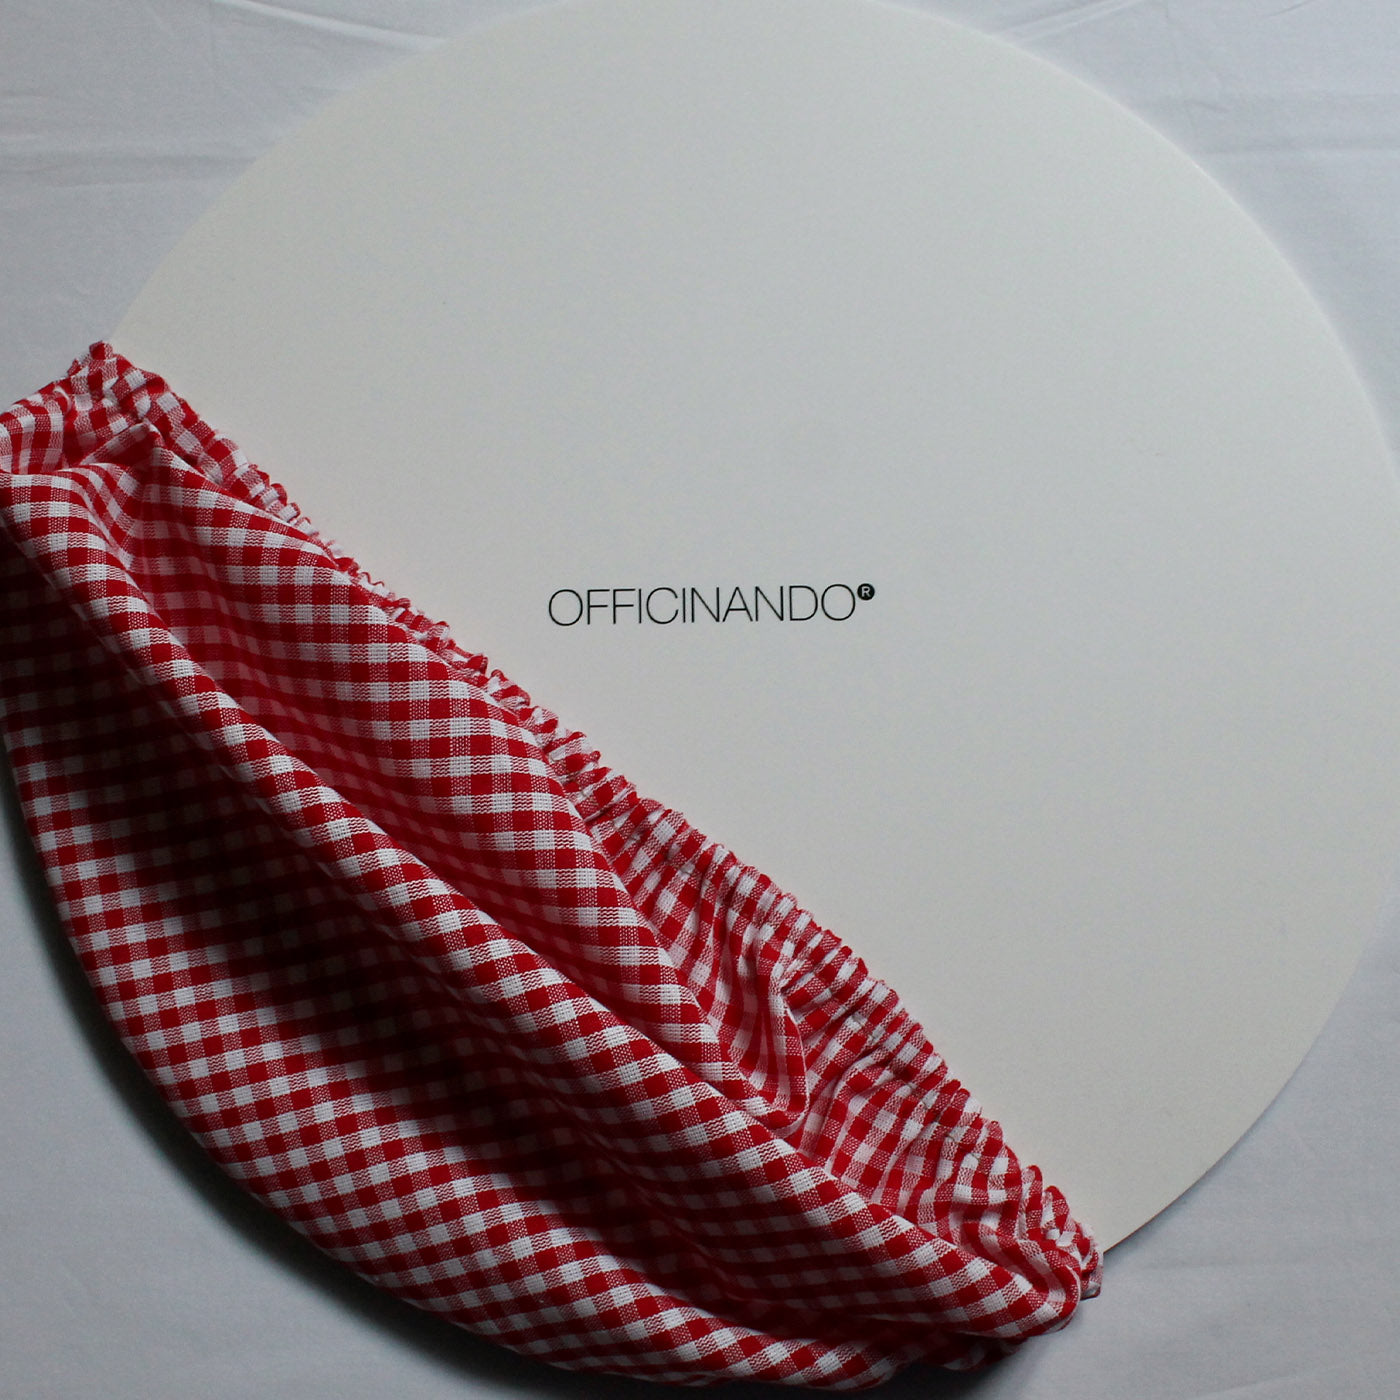 Cuffiette Check Round Red & White Placemat #2 - Alternative view 2